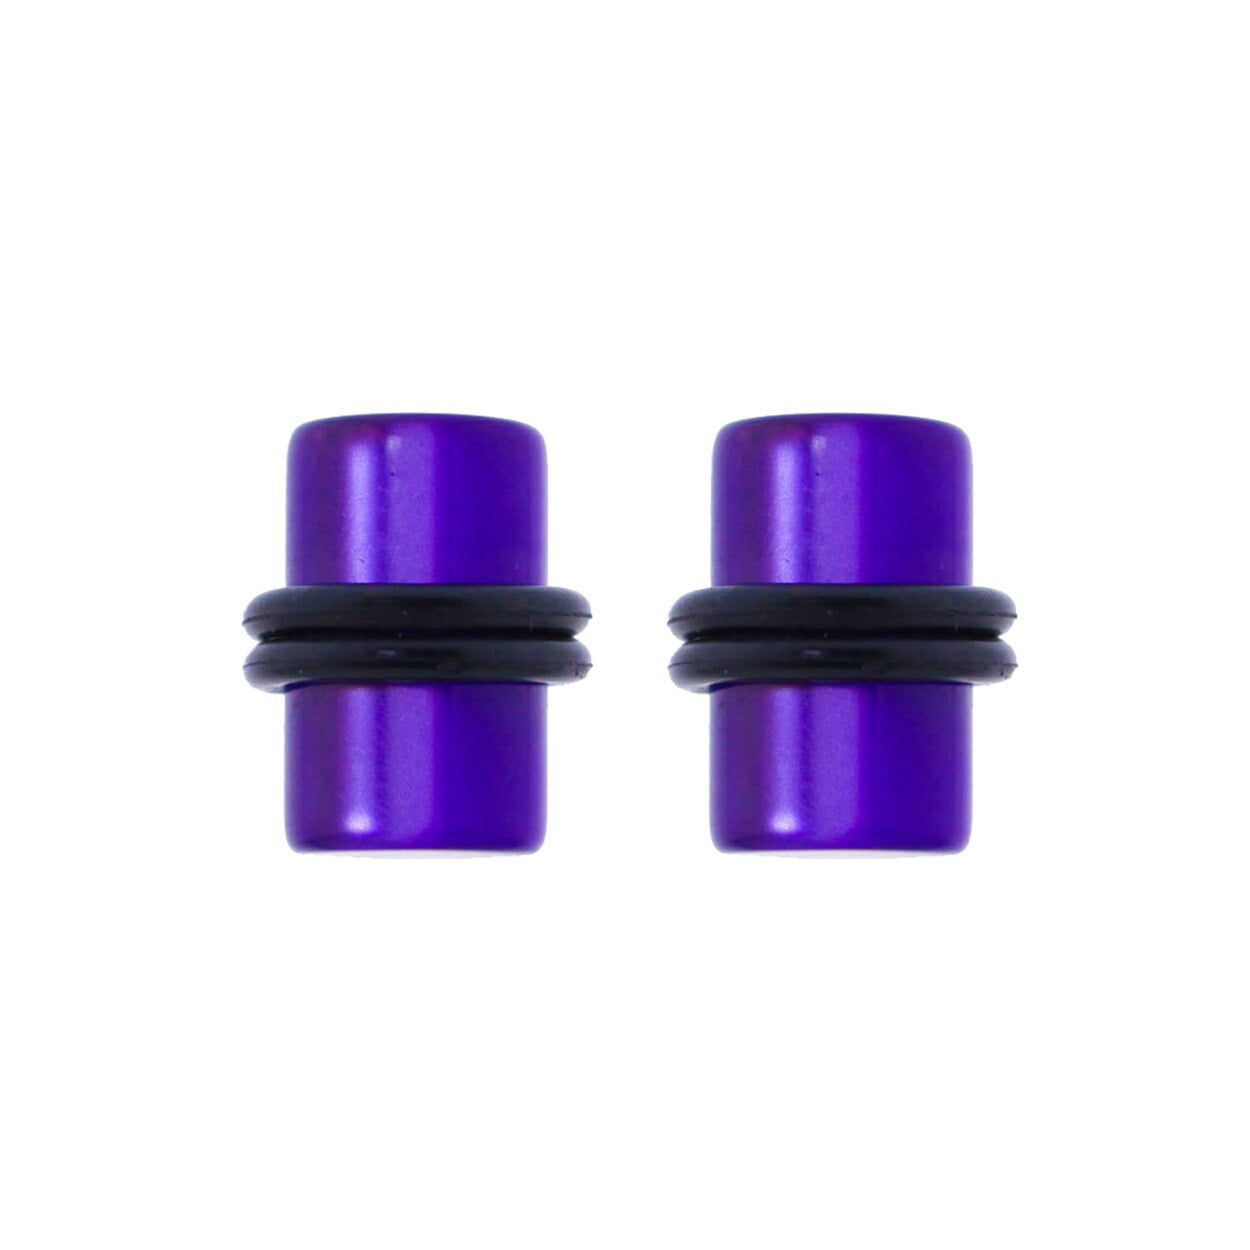 Sold as Pairs Light Purple Brilliant Sparkles Color Body Single Flared Plugs